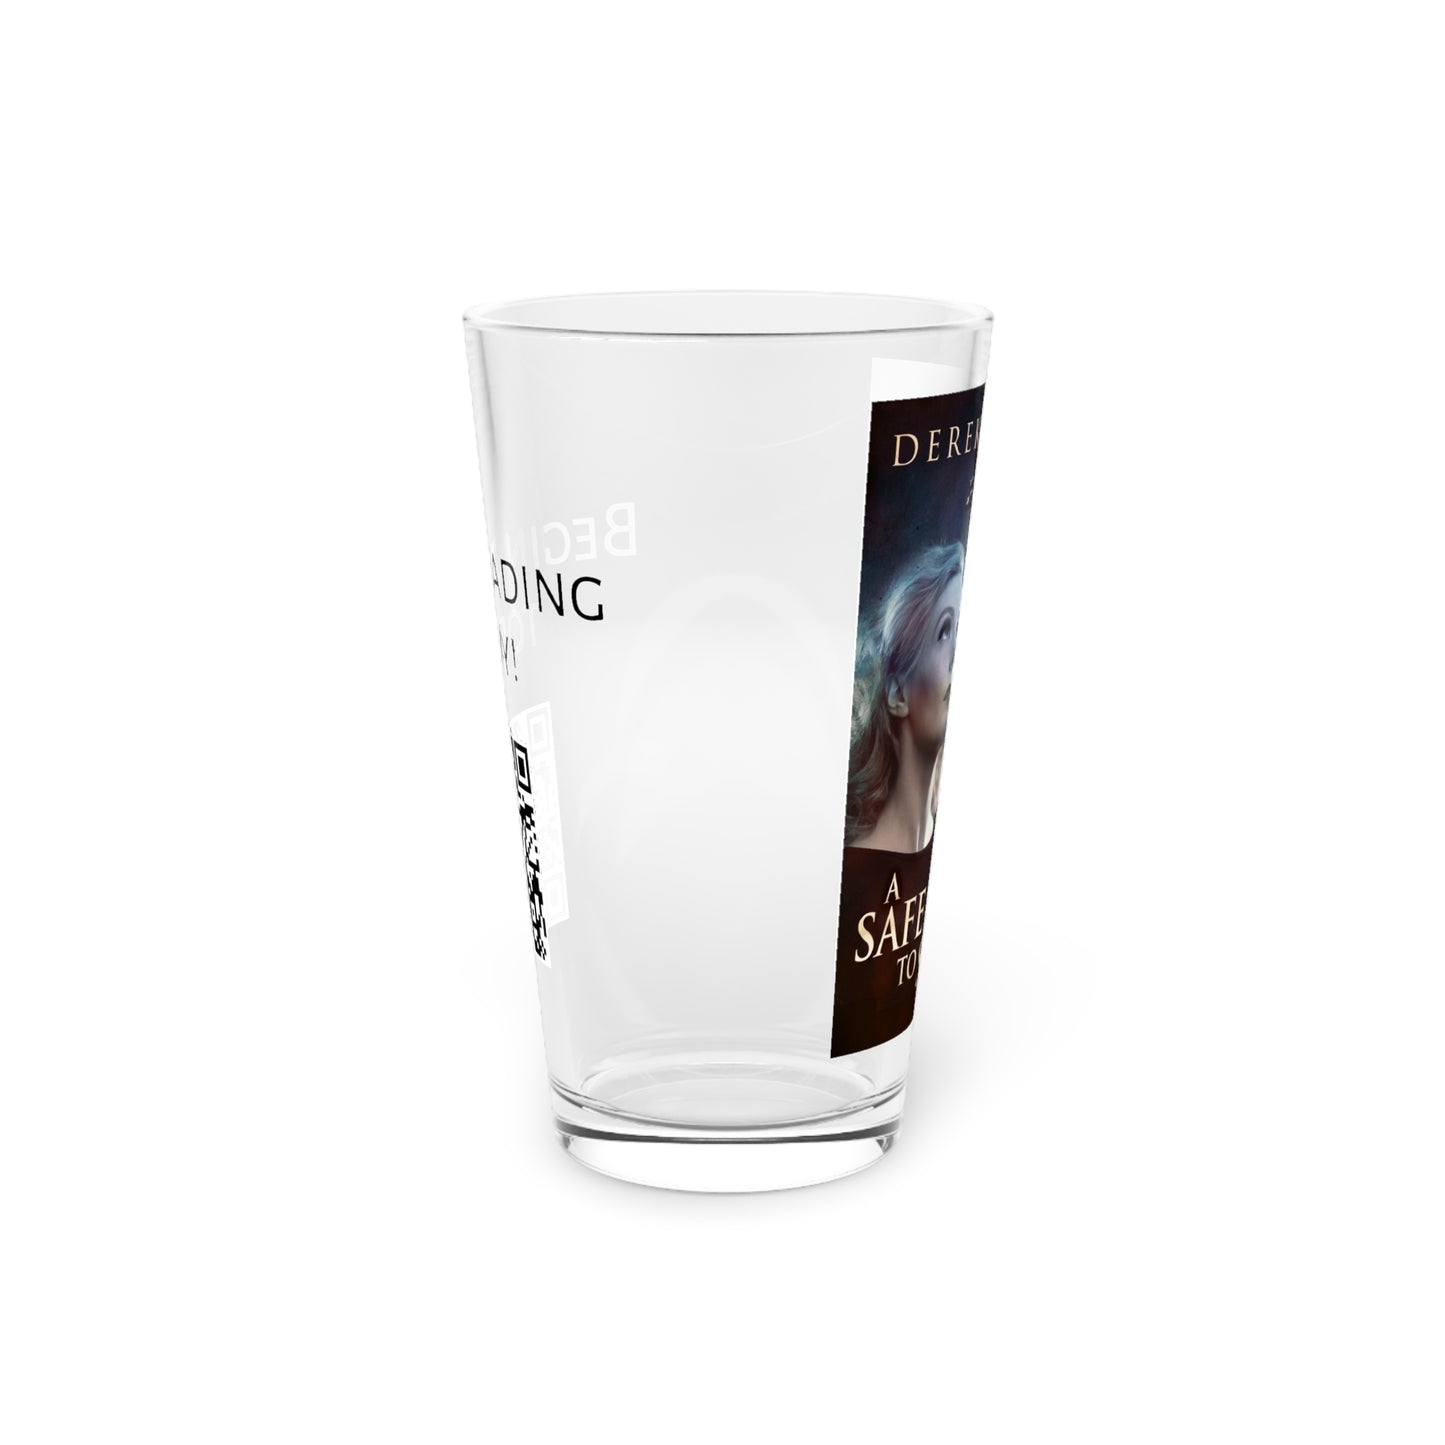 A Safe Place To Stay - Pint Glass